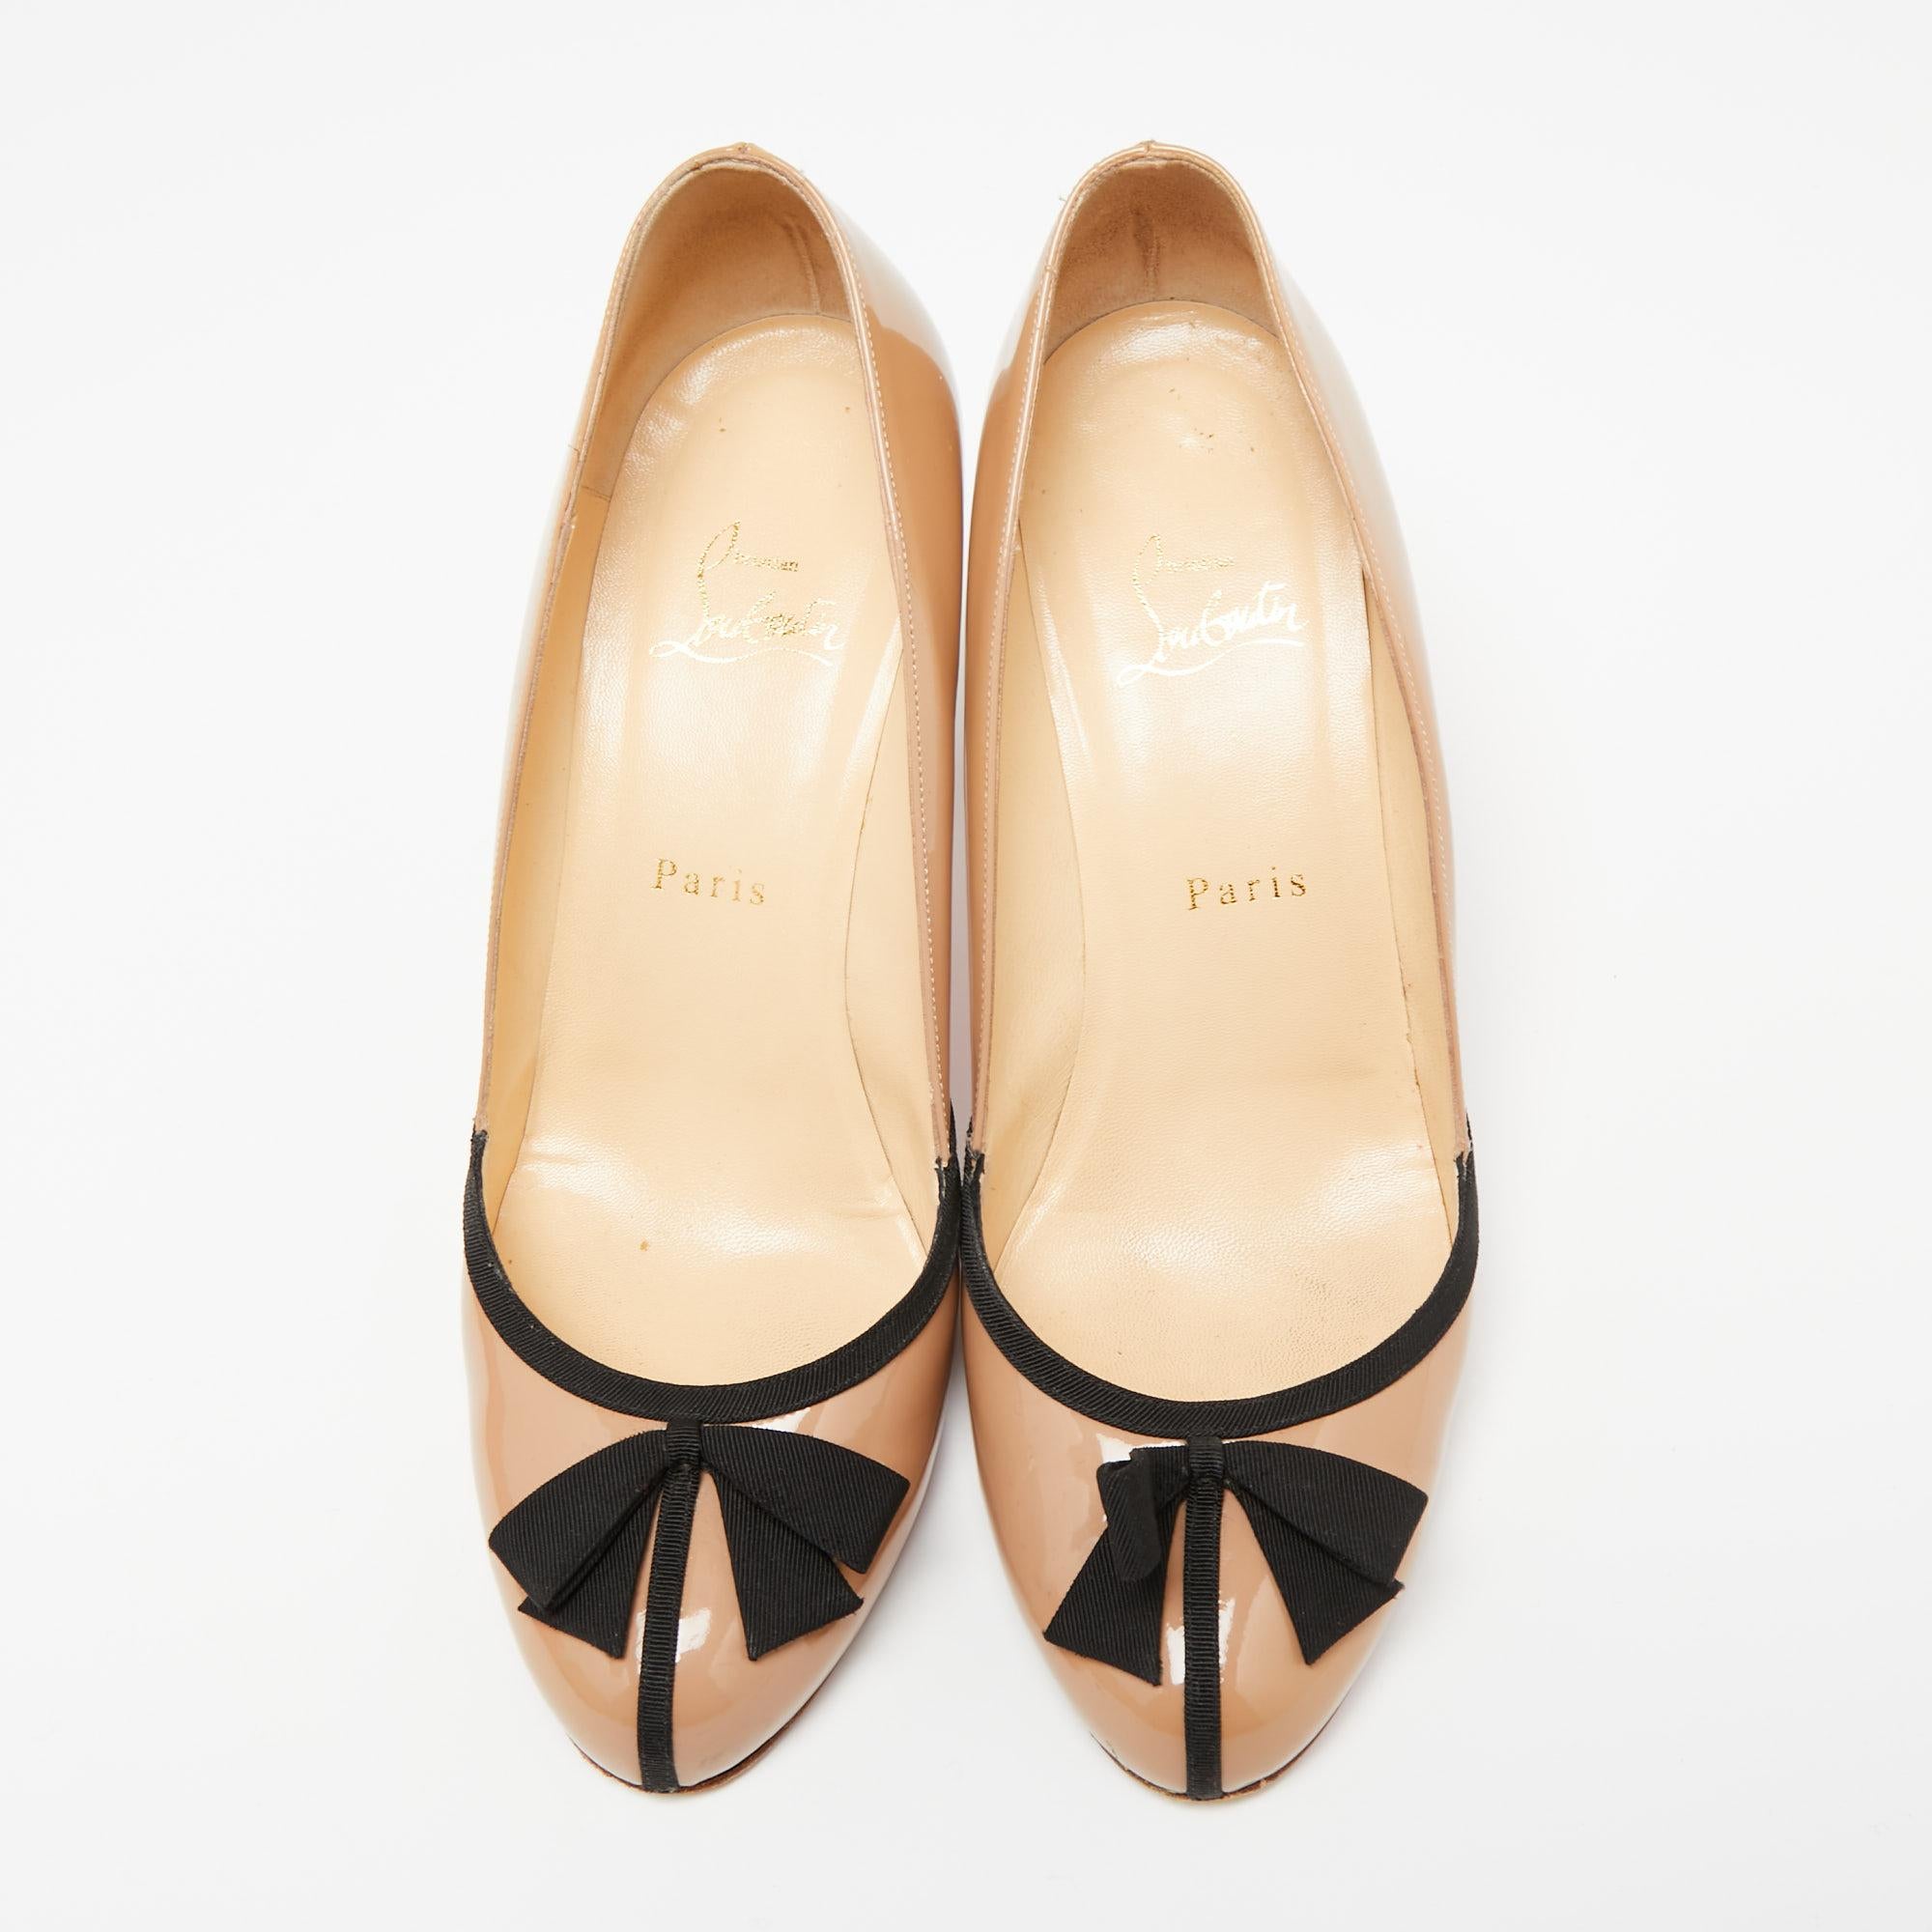 Statement pumps for you to stand out! These beige Christian Louboutin pumps are crafted from patent leather and feature rounded toes and 8.5 cm heels. They are perfect for casual dinner outings.

Includes: Original Dustbag, Original Box, Extra heel